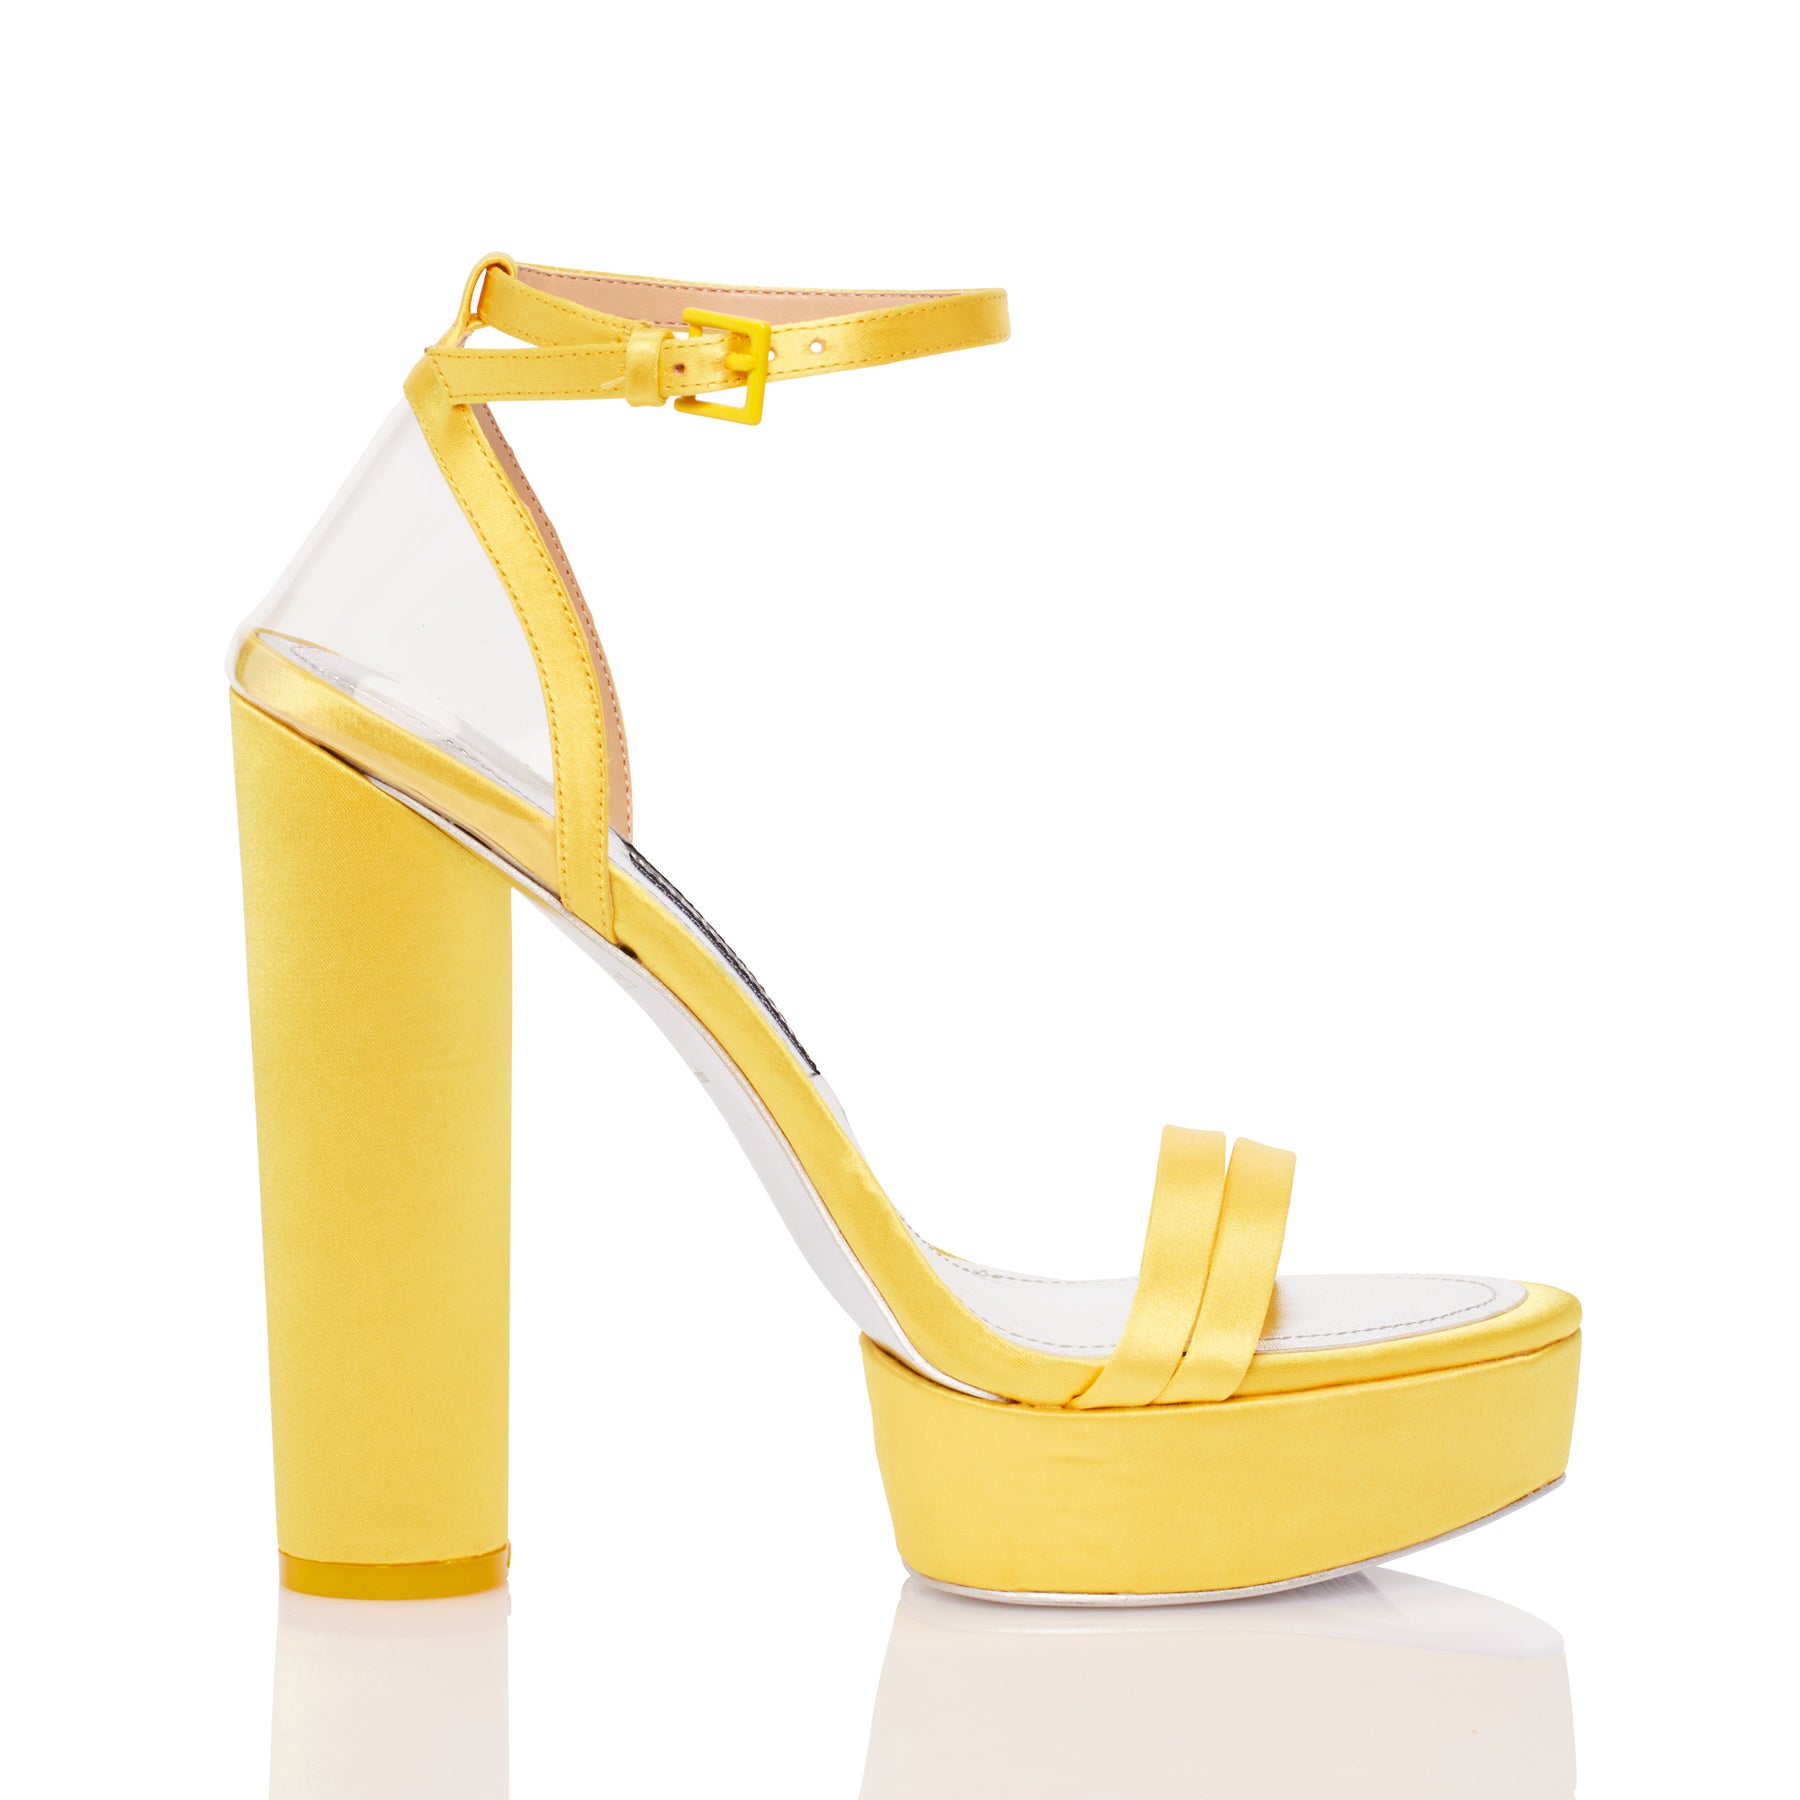 Profile of the Platform Sandal luxury shoes from Jessica Rich in yellow.